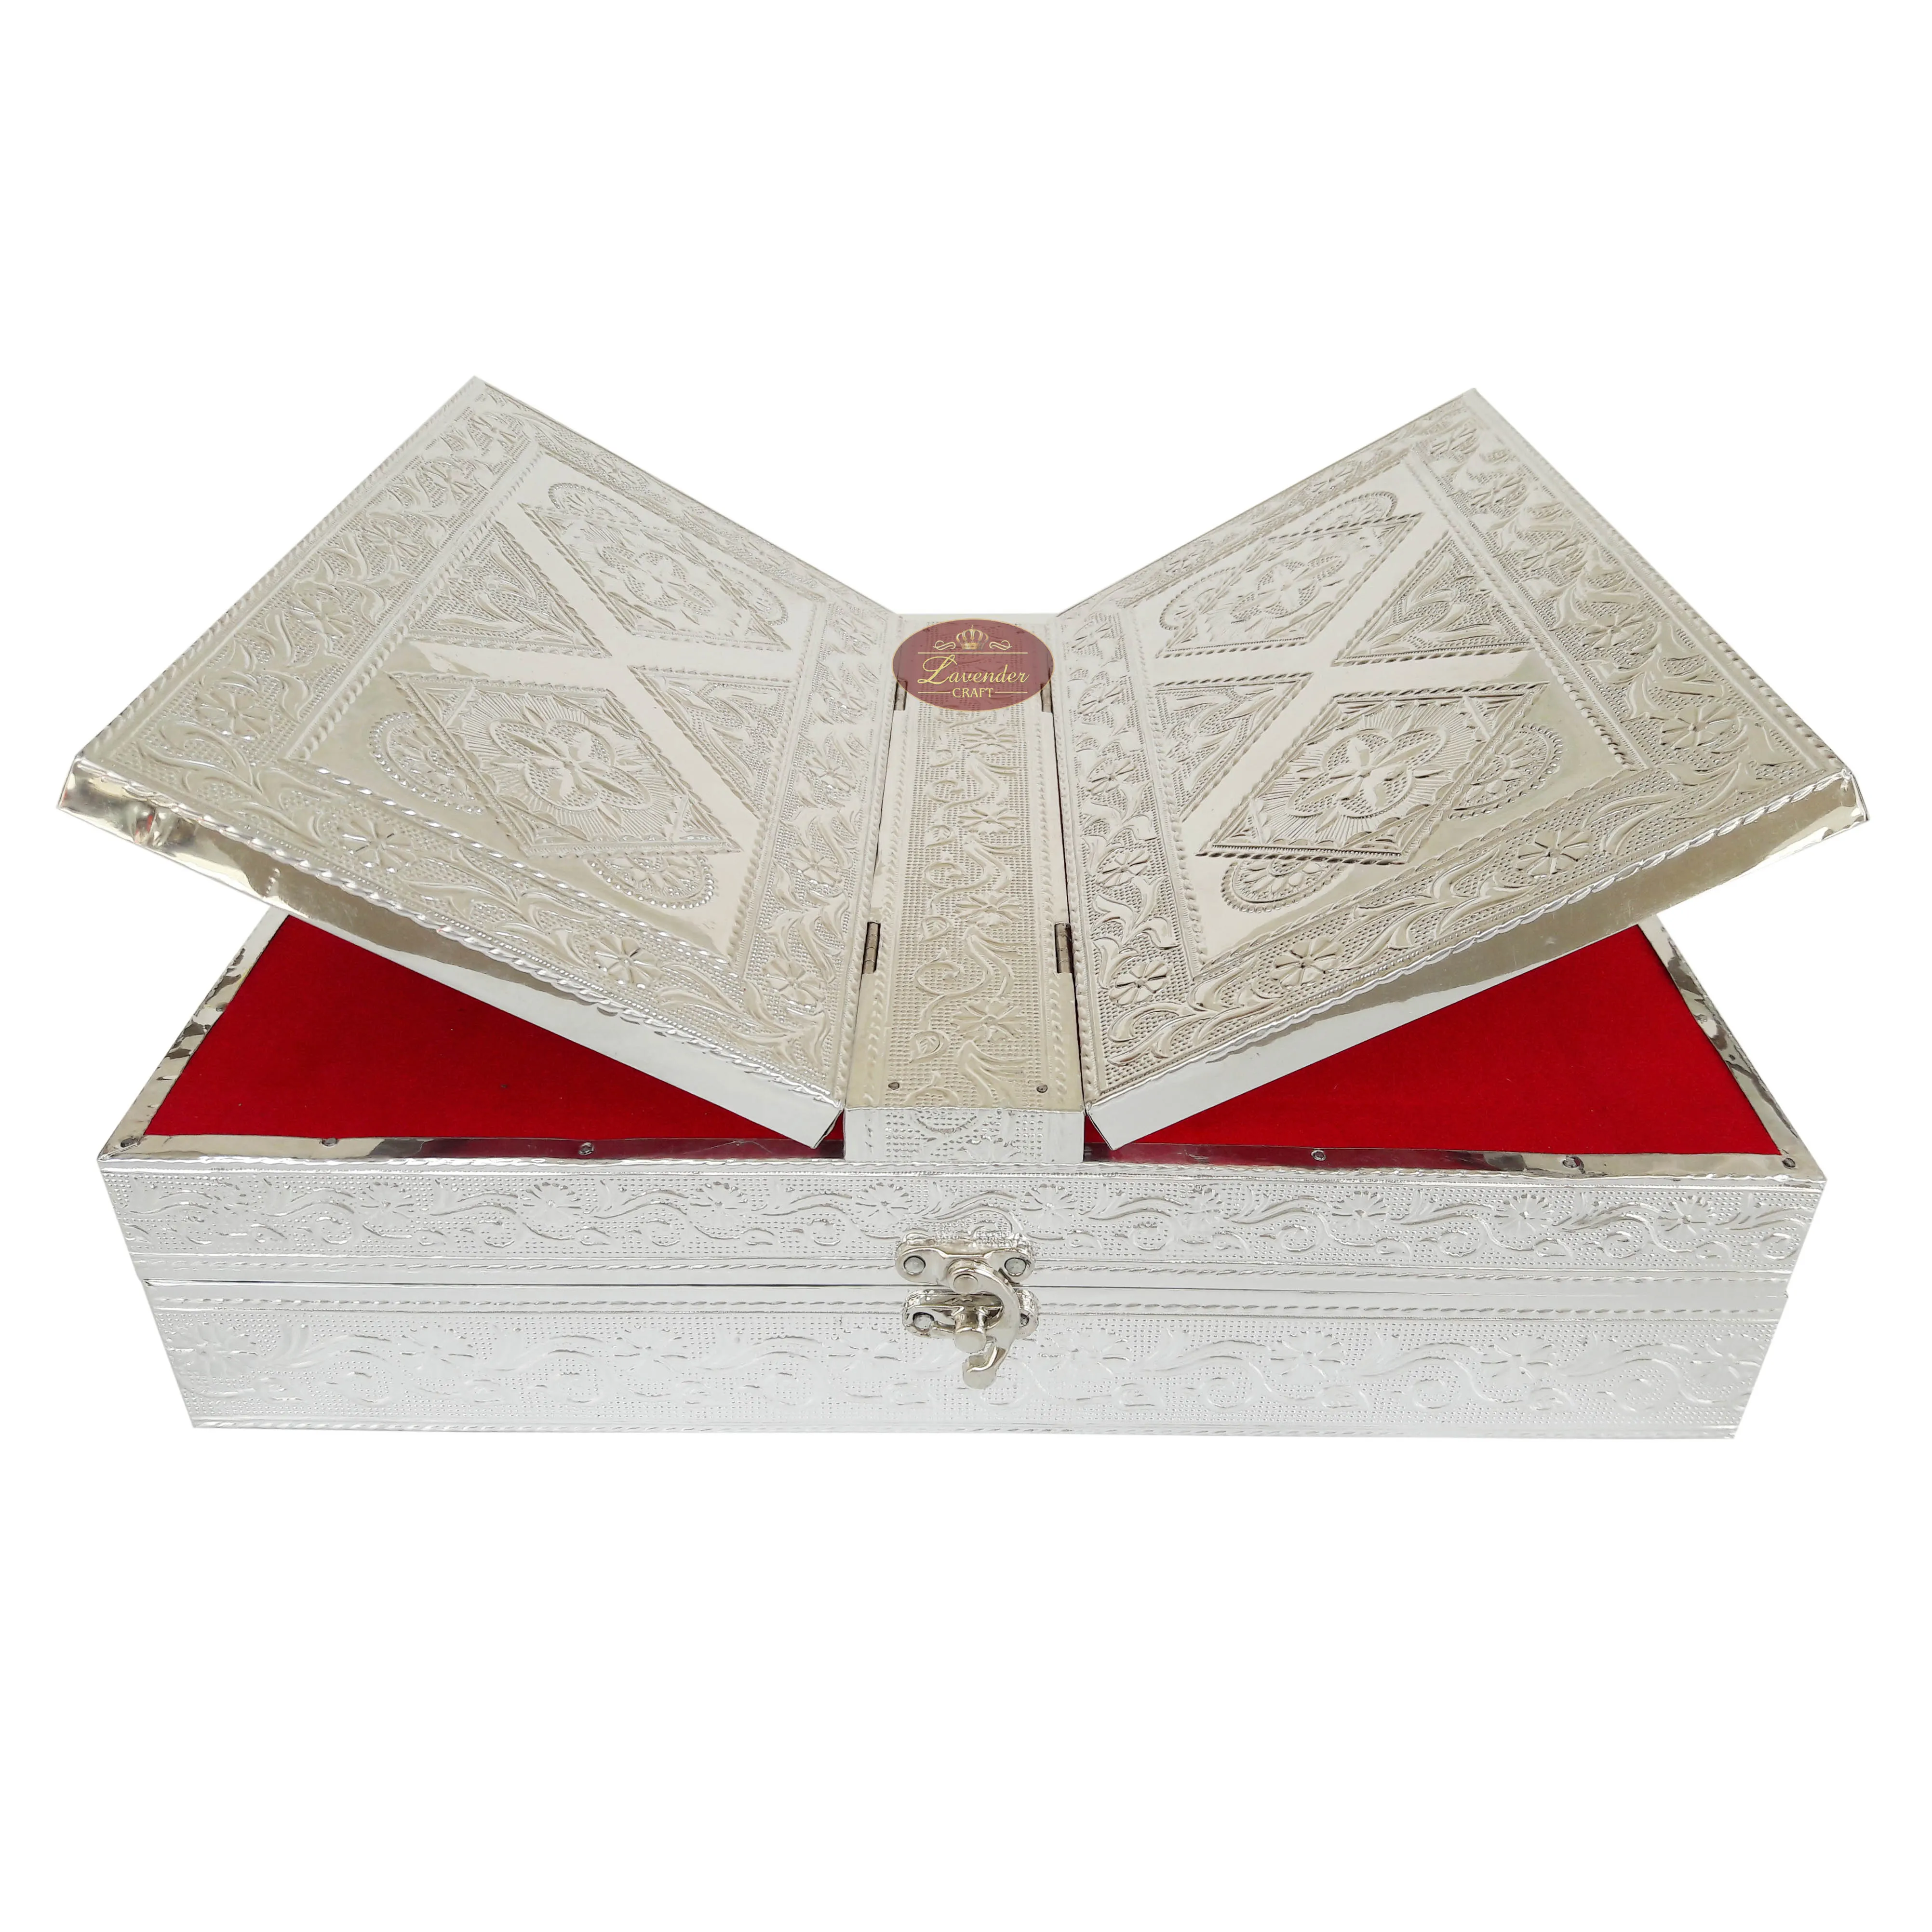 SILVER COLOURED REHAL HOLY QURAN BOOK STAND-BOOK BOX - WOODEN HANDMADE, METAL FINISH (13.12 "x 10.12" x 3.67 "INCH)